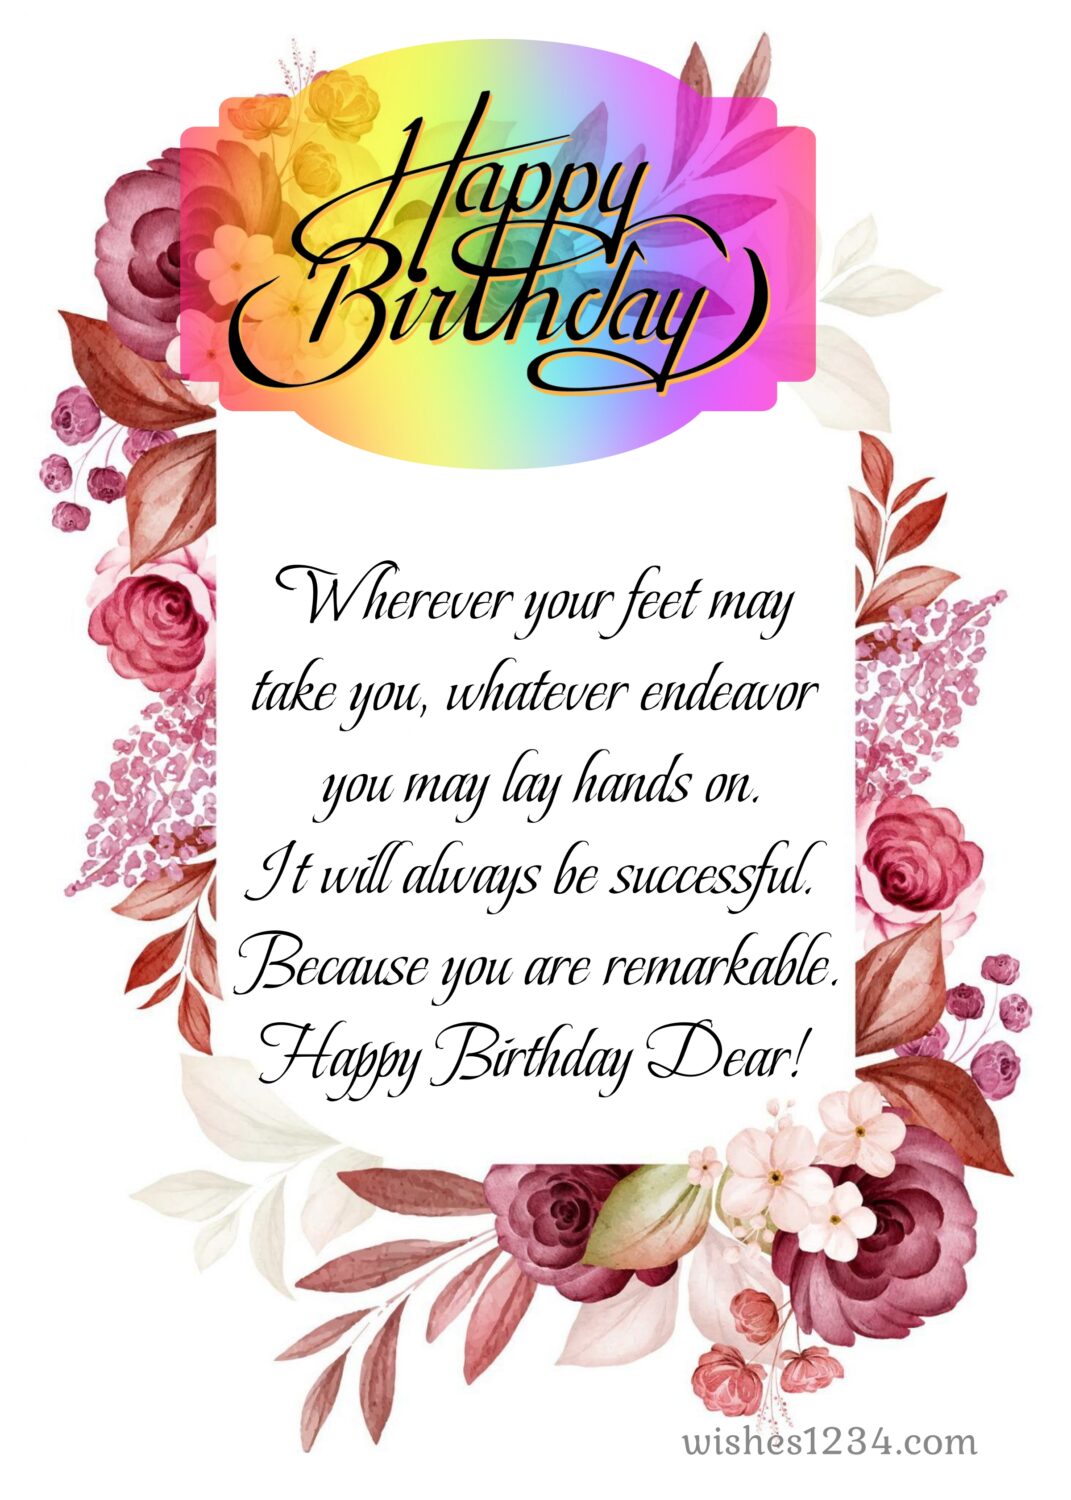 Pink roses background birthday greetings, Romantic Birthday Messages.